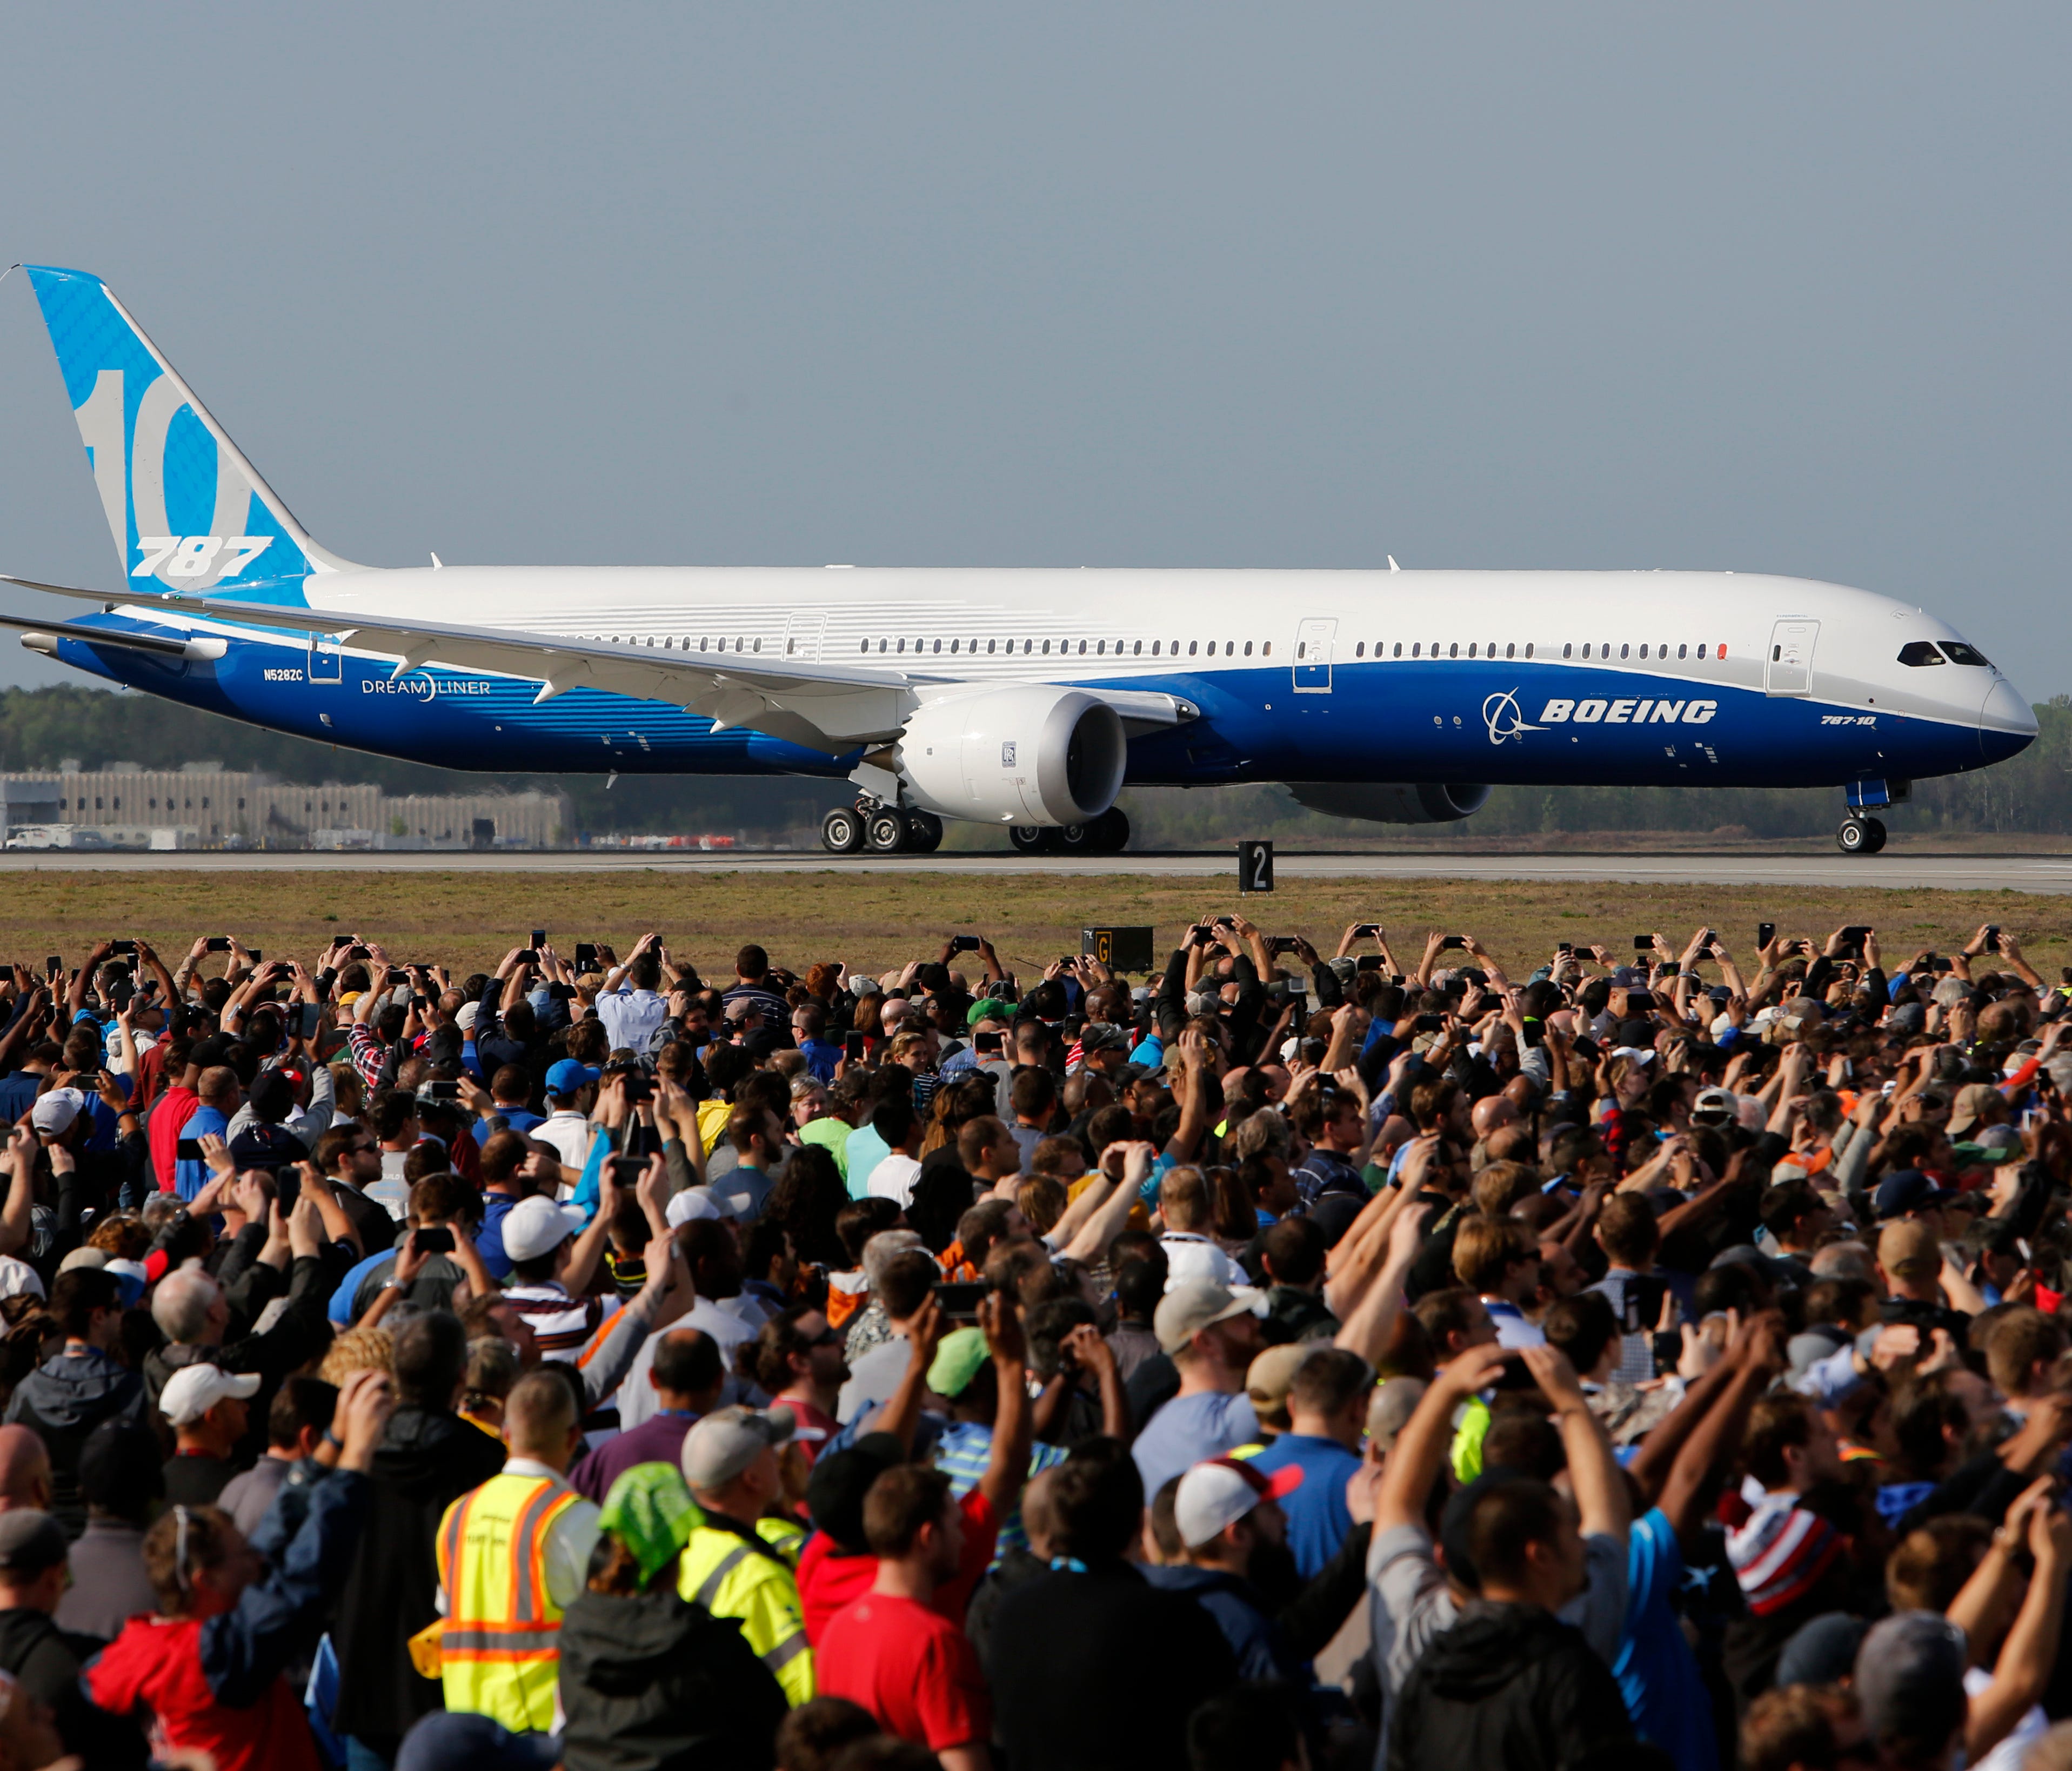 Boeing employees raise up their camera phones to record the first test flight of the new Boeing 787-10 Dreamliner as it taxis down the runway during a ceremony at Charleston International Airport in North Charleston, S.C., Friday, March 31, 2017.